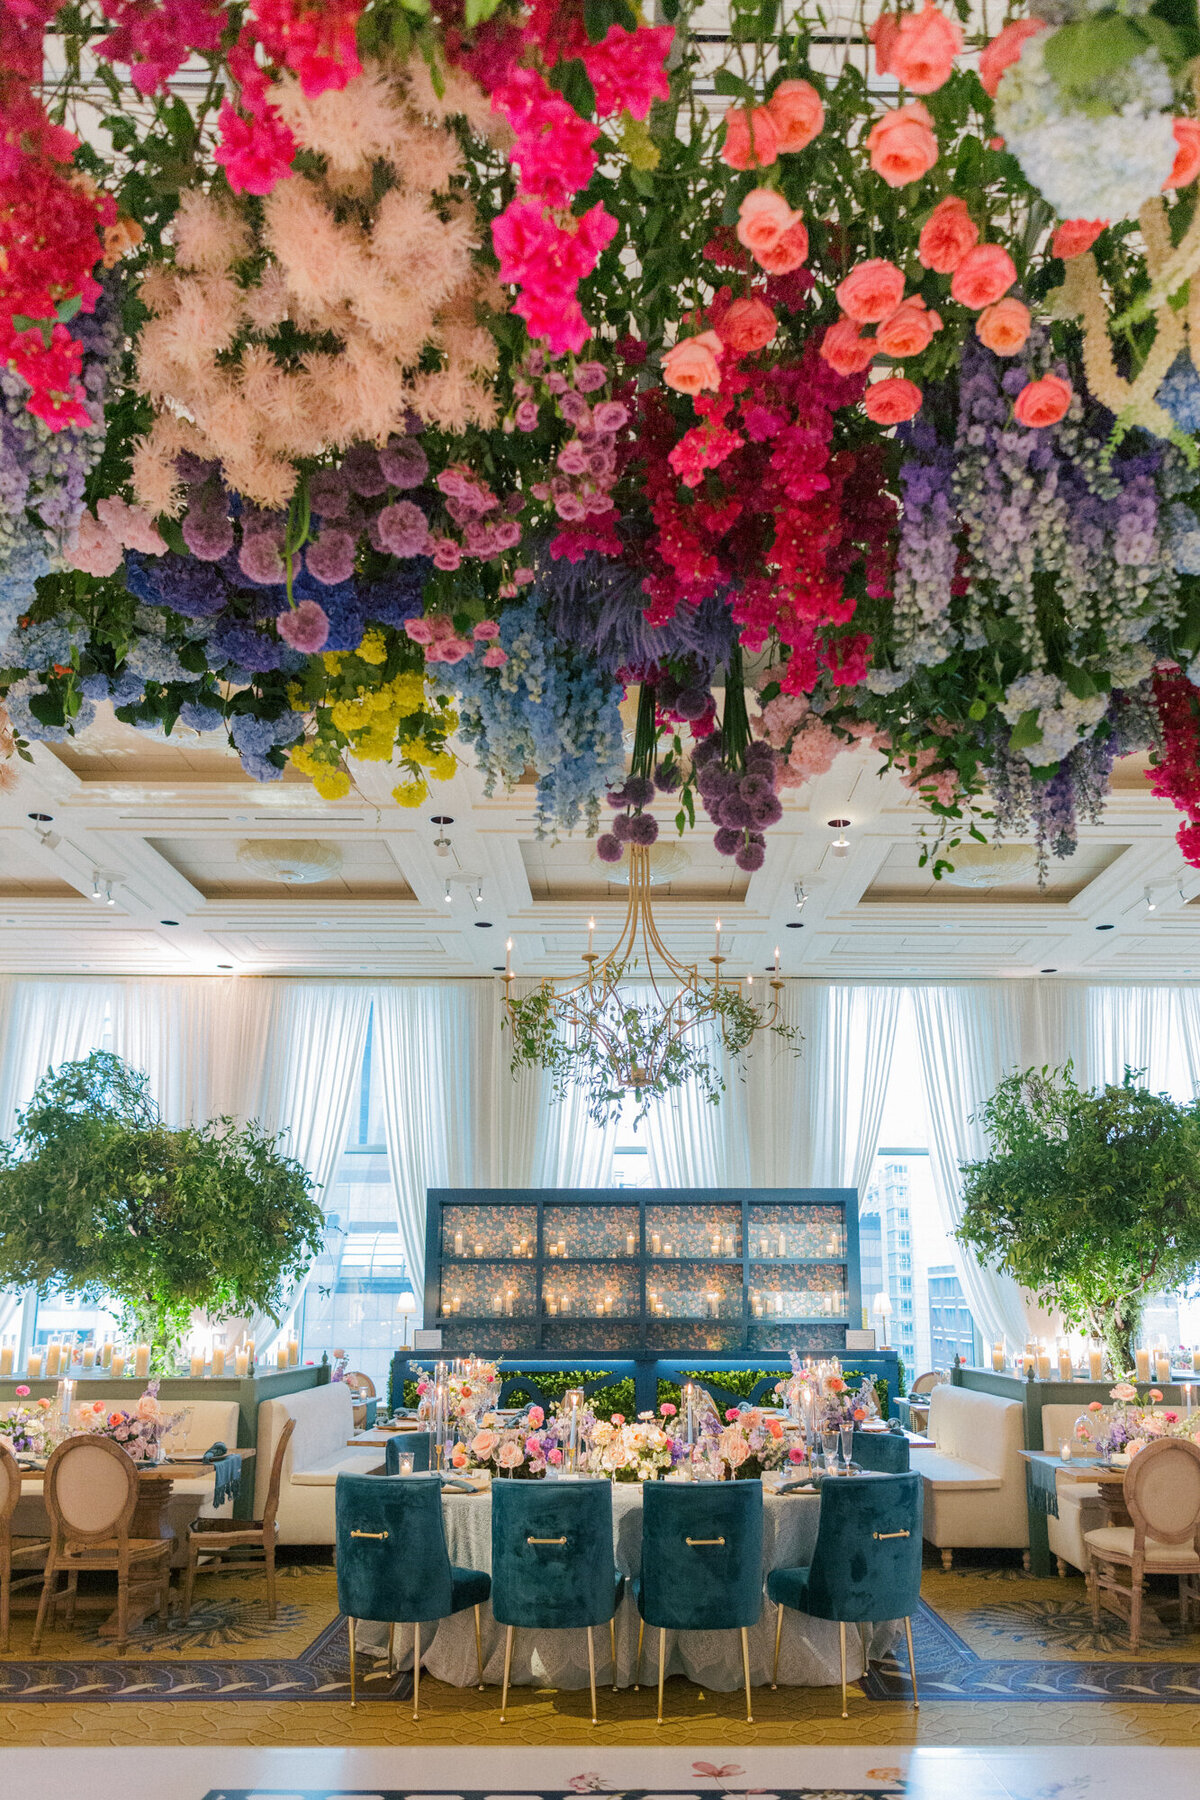 An interior design project photographed for Life in Bloom at the Peninsula in Chicago